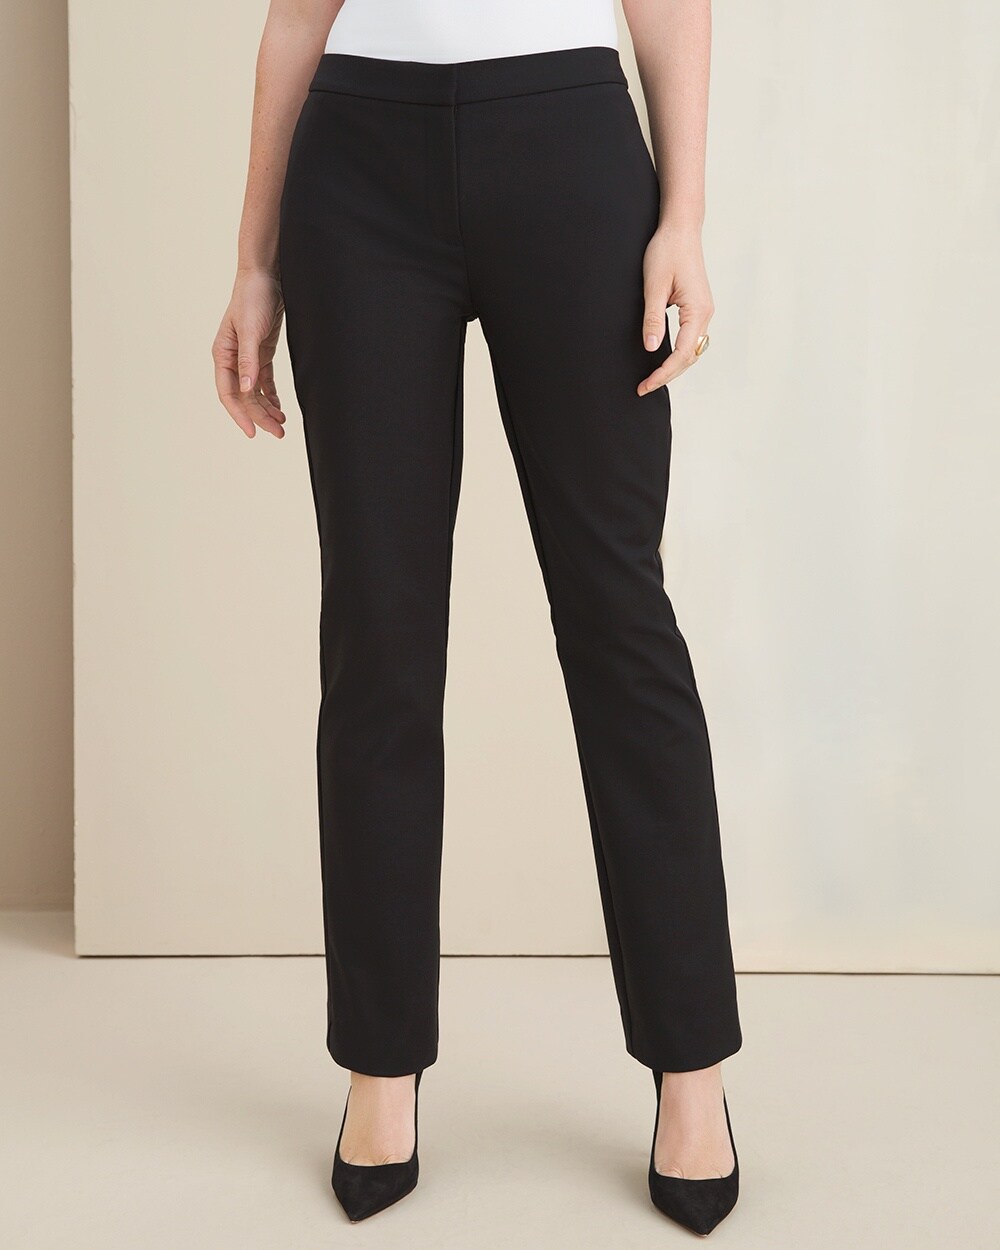 So Slimming Classic Trousers